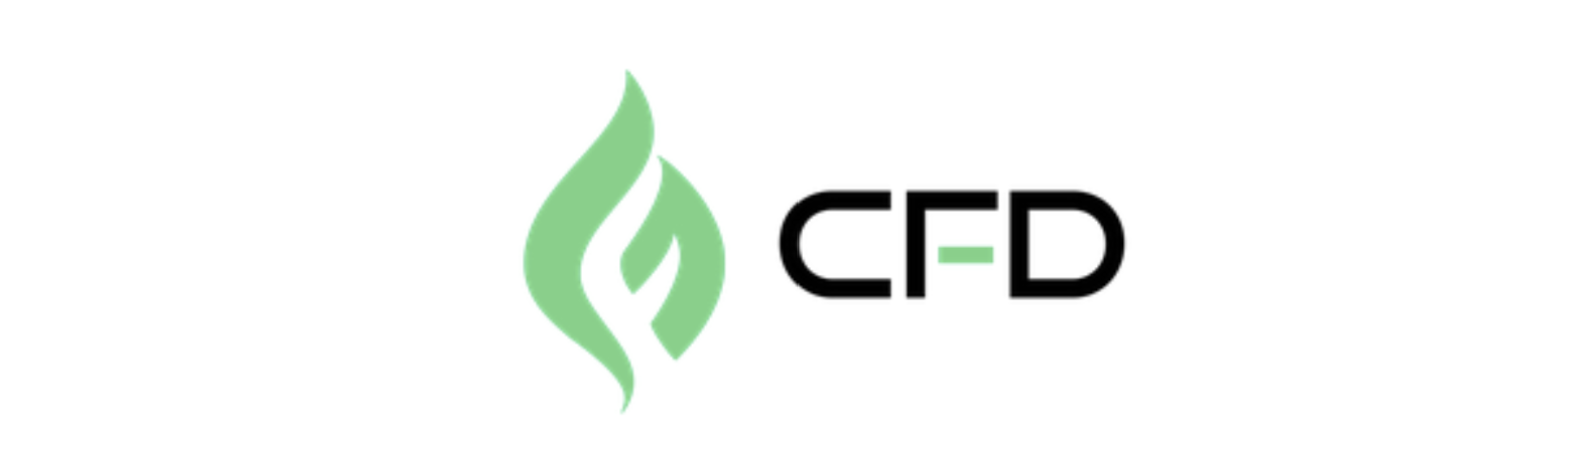 cfdholding